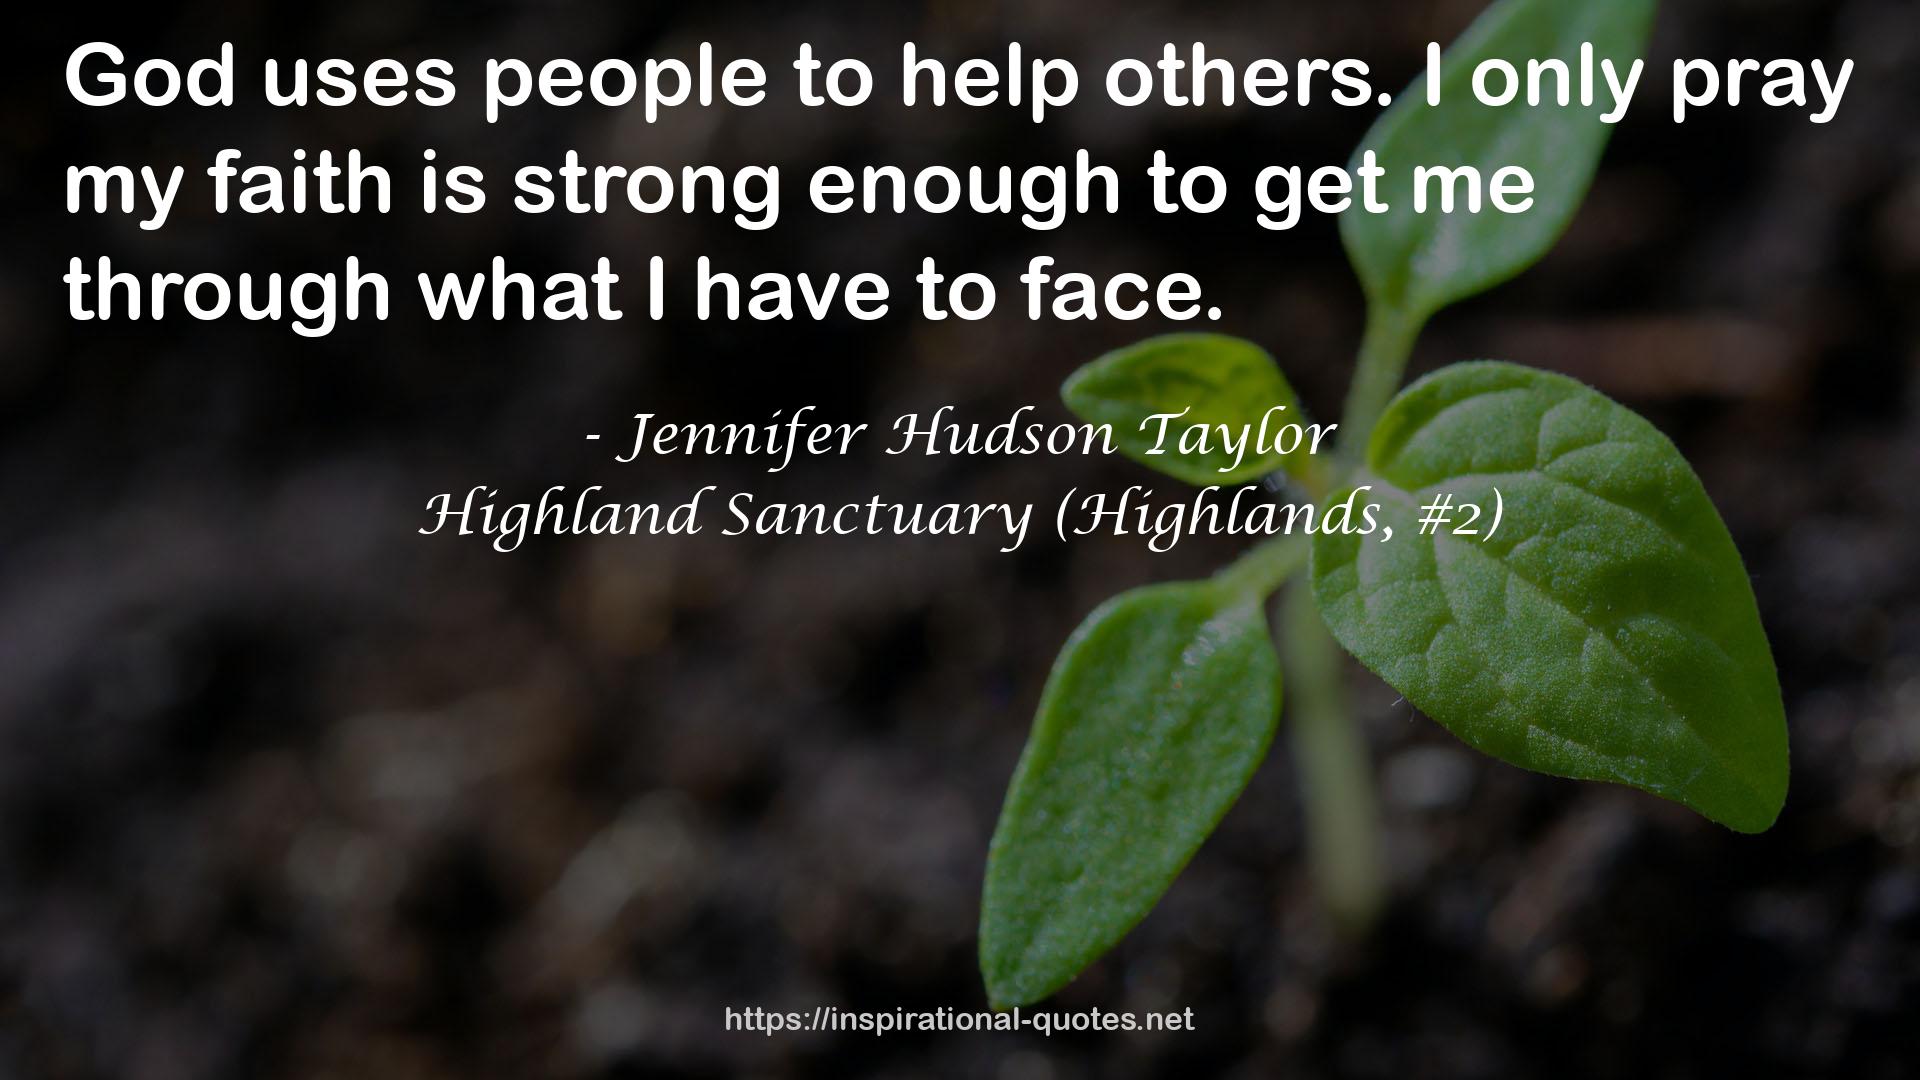 Highland Sanctuary (Highlands, #2) QUOTES